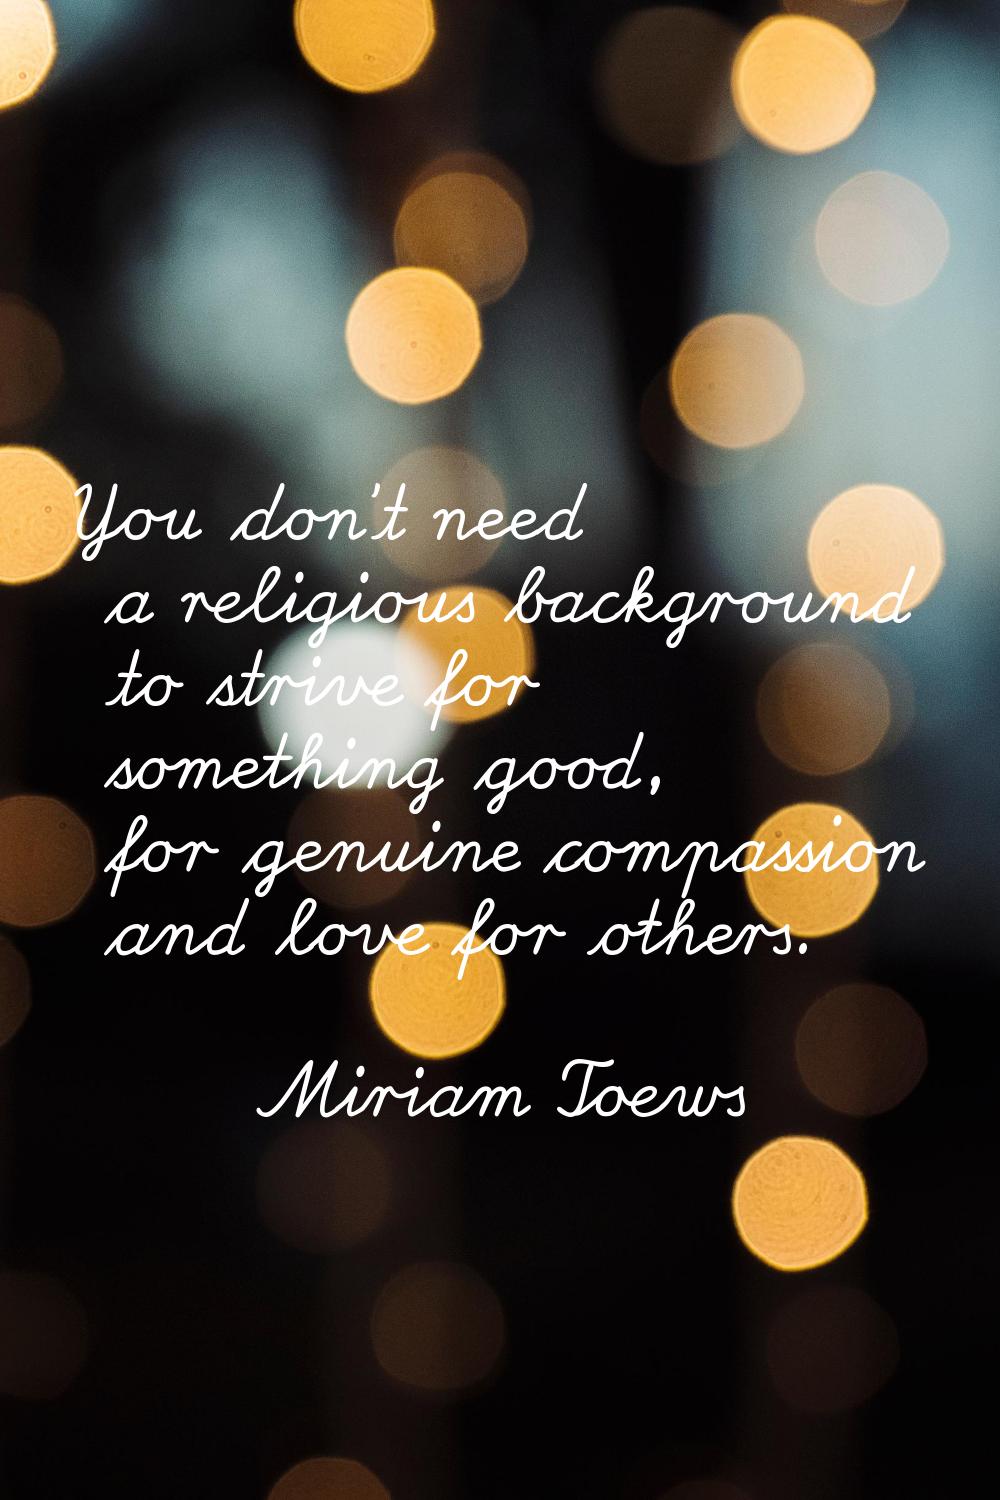 You don't need a religious background to strive for something good, for genuine compassion and love